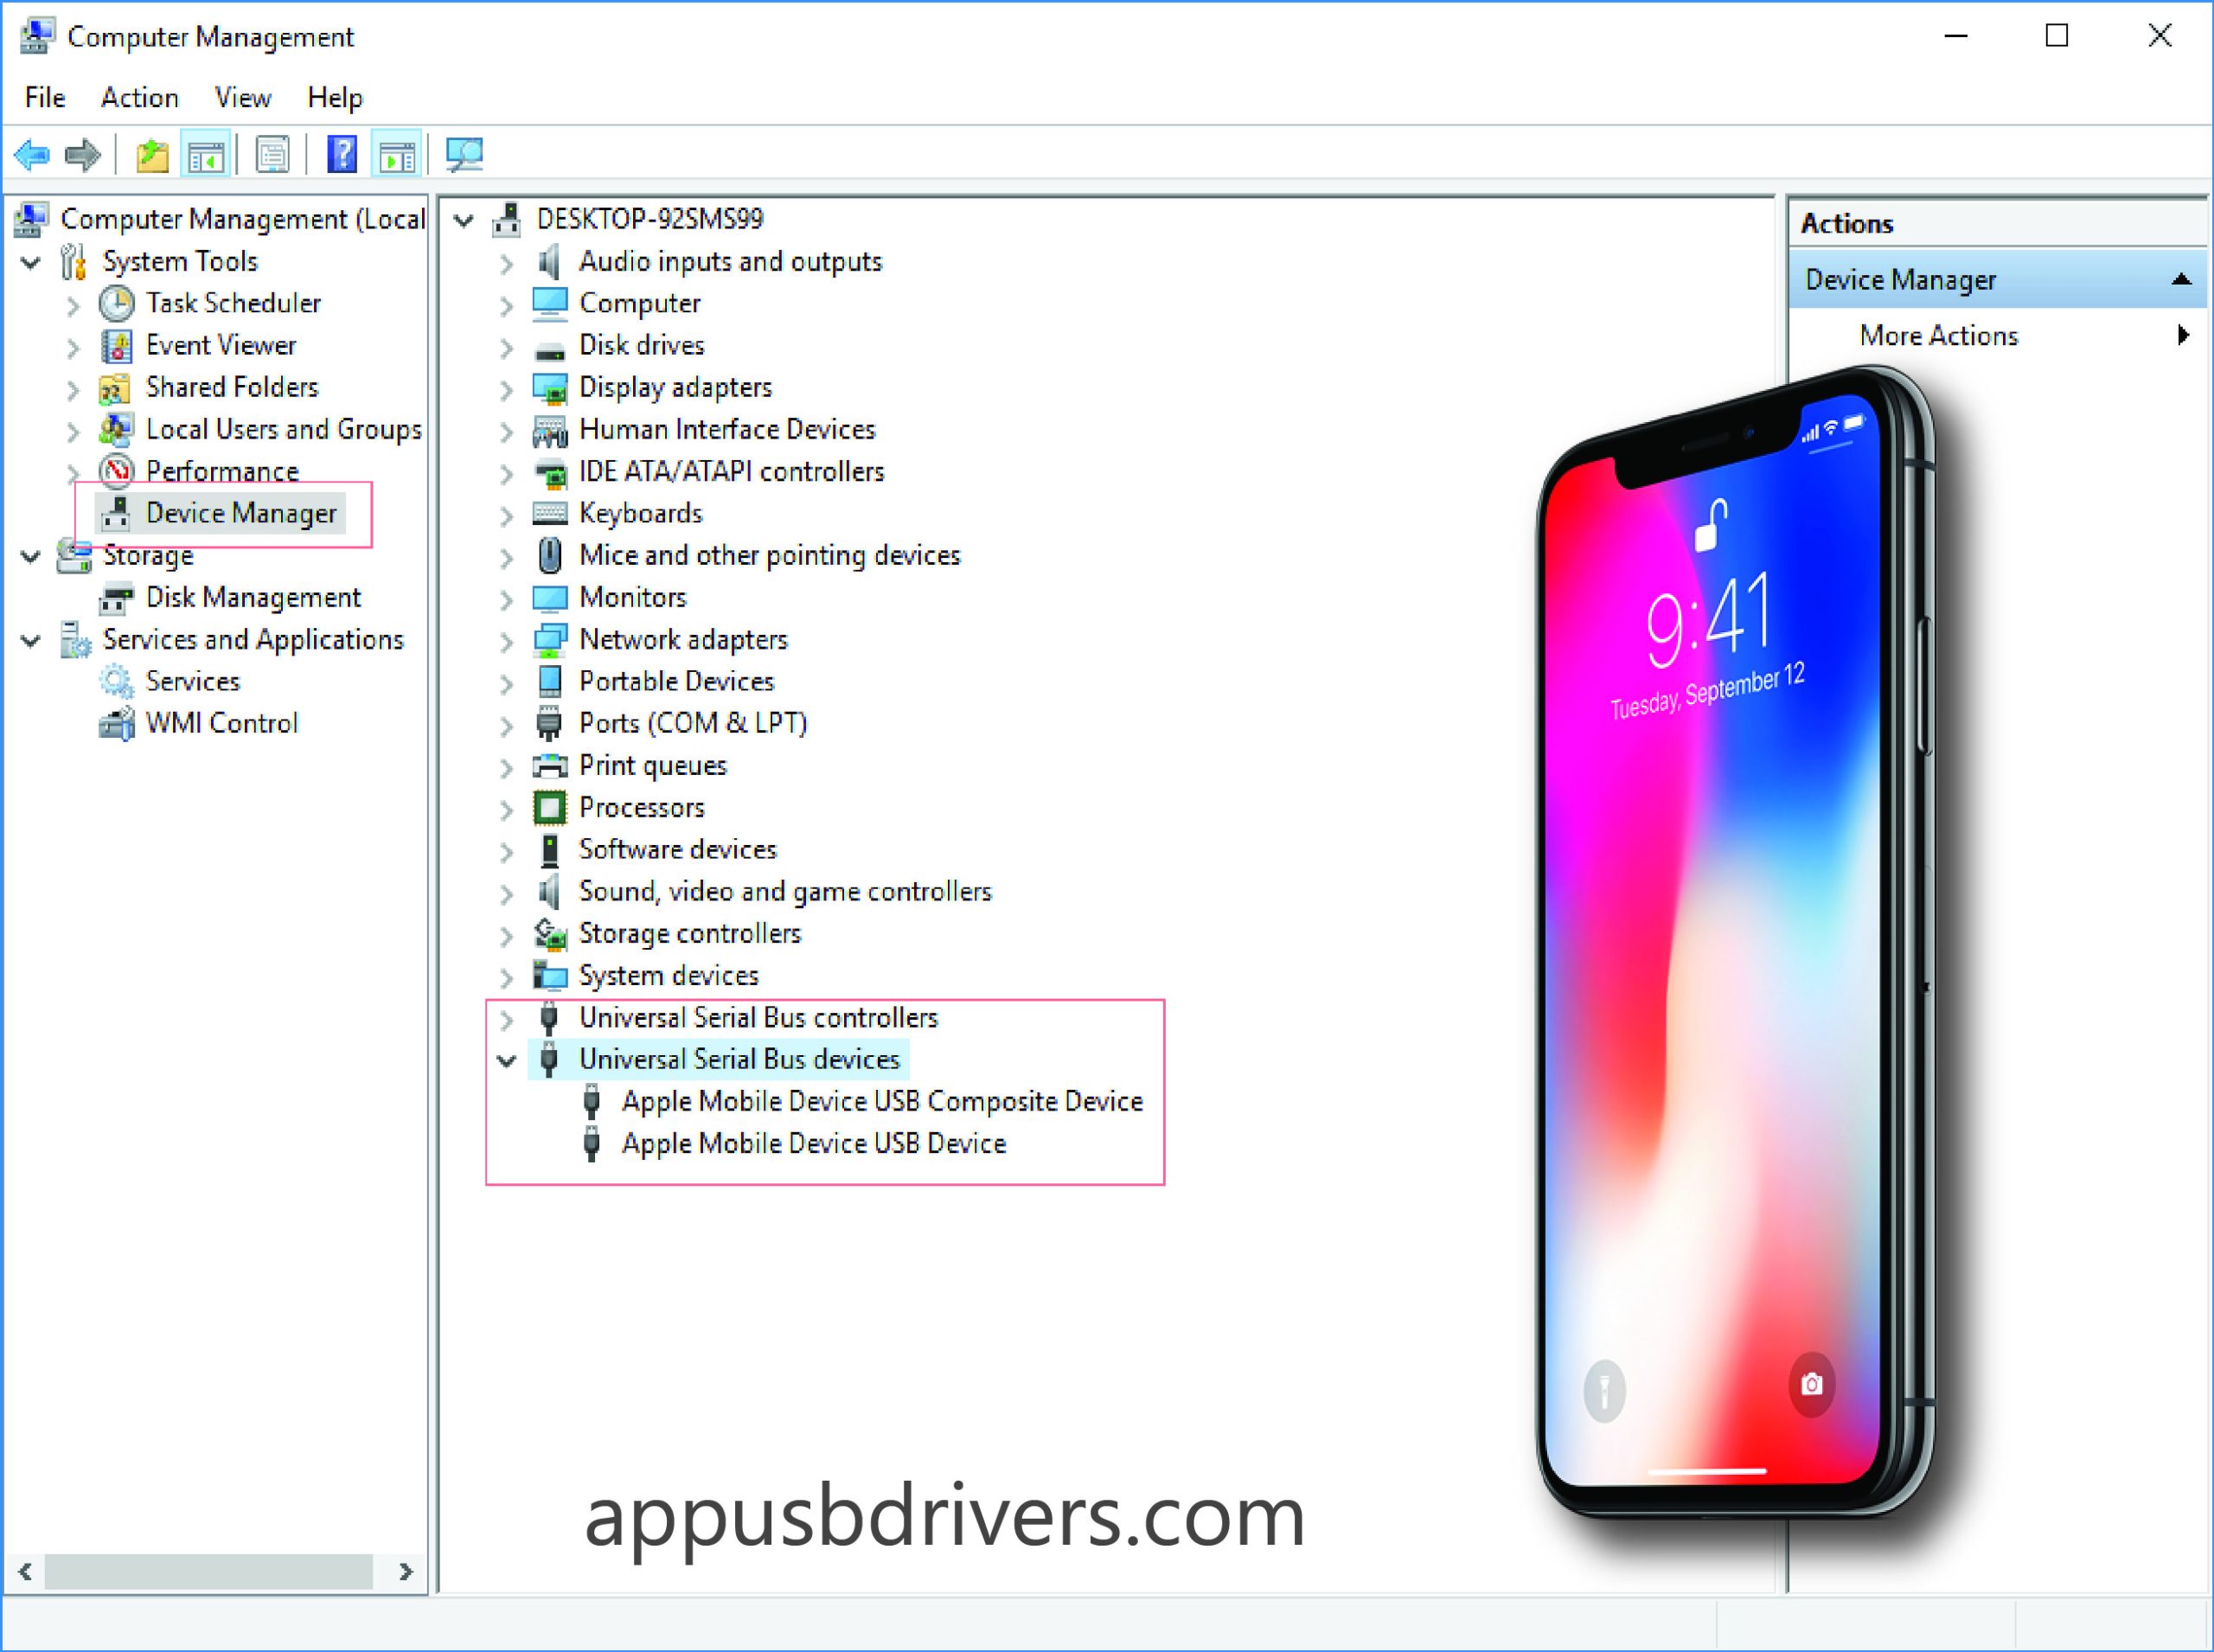 Mobile Device USB Driver